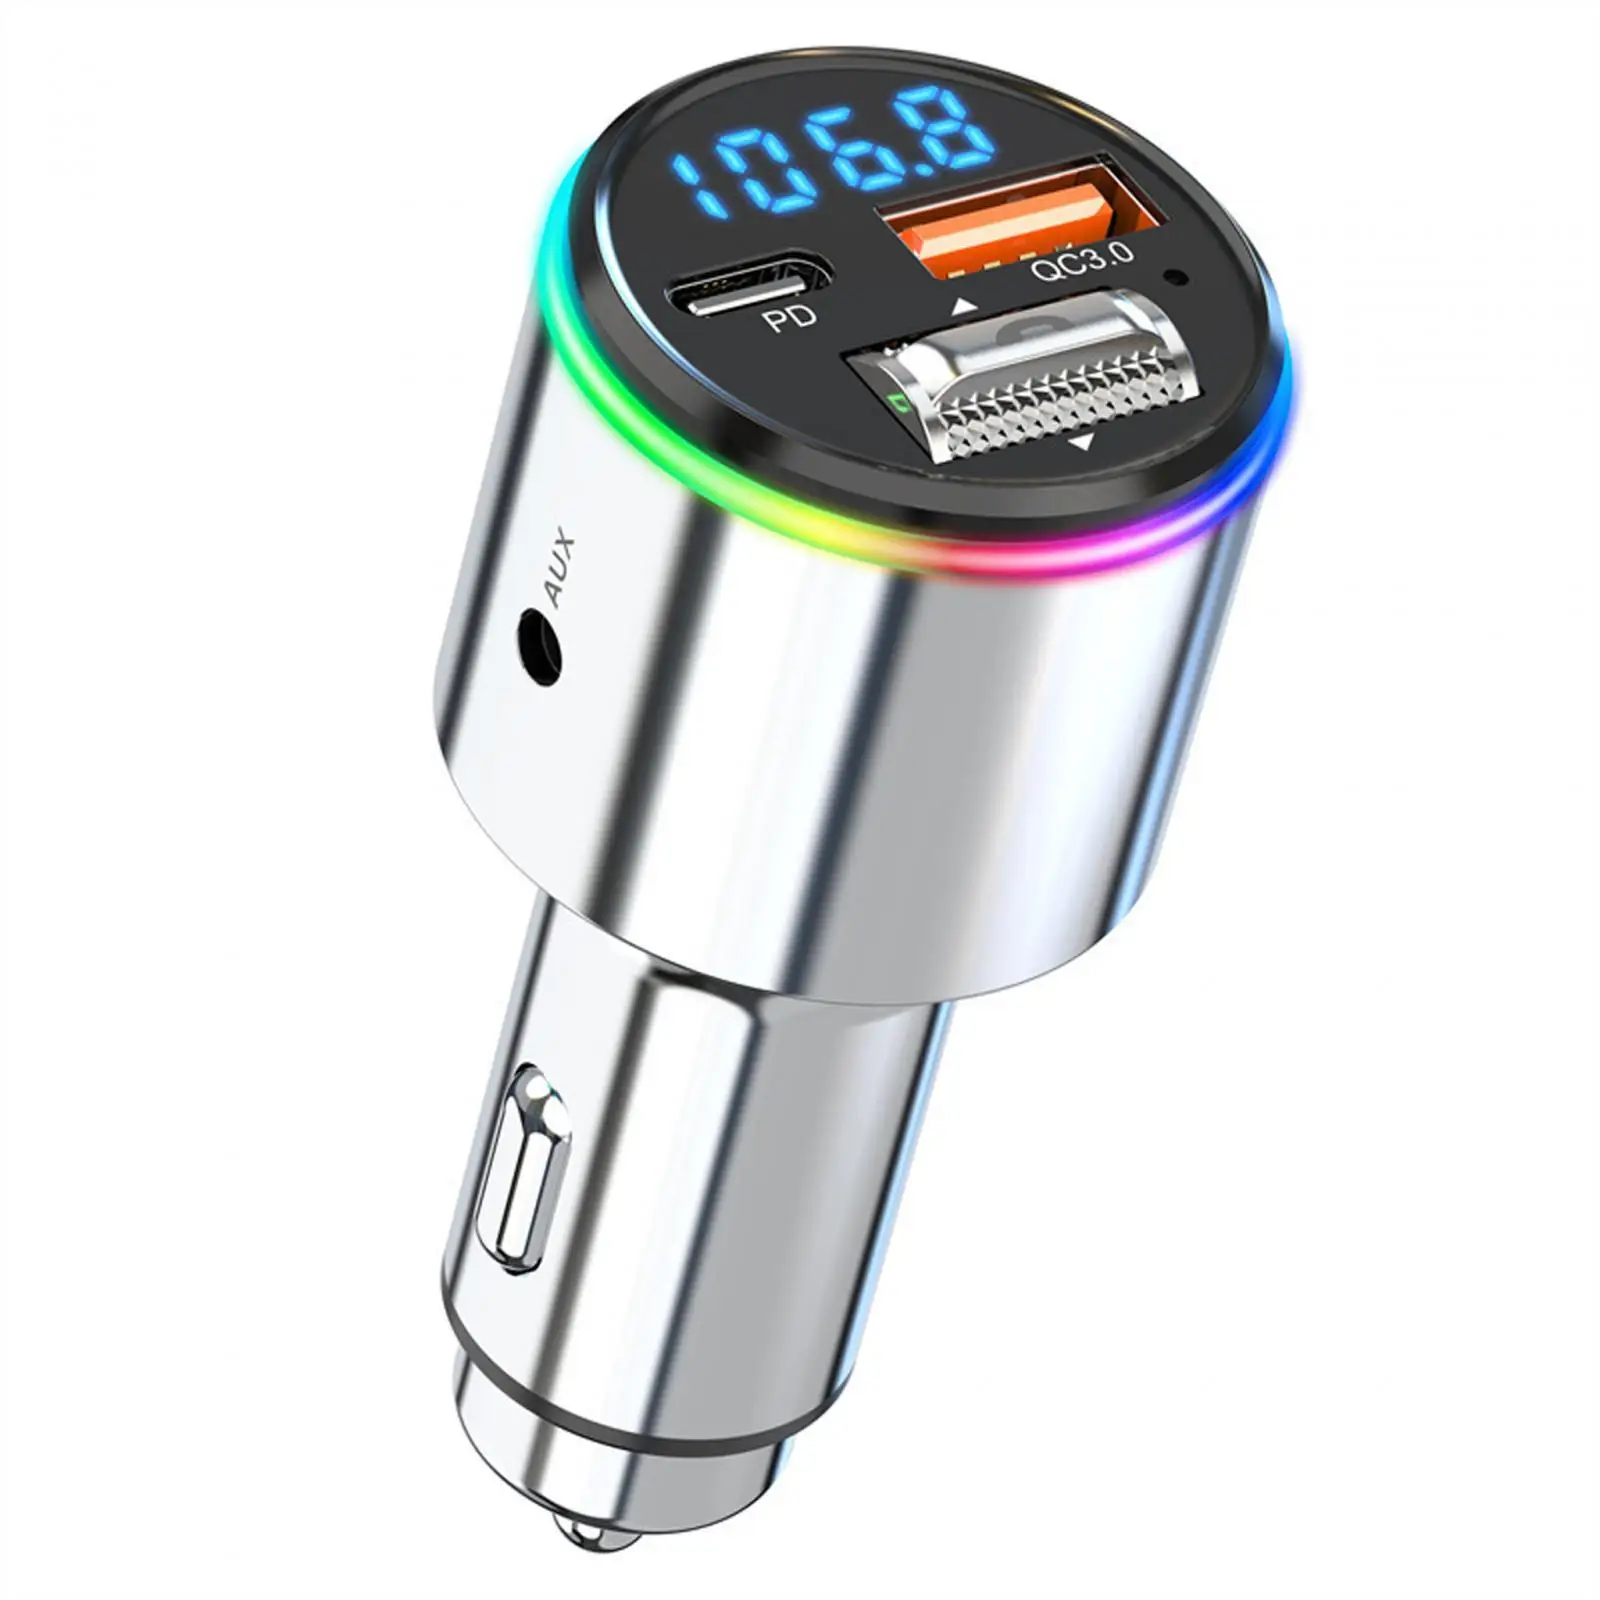 V5.3 FM Transmitter for Car Stable Connection Afc Voice Broadcast Cigarette Lighter BC1.2 Bluetooth Car Adapter for SUV Car